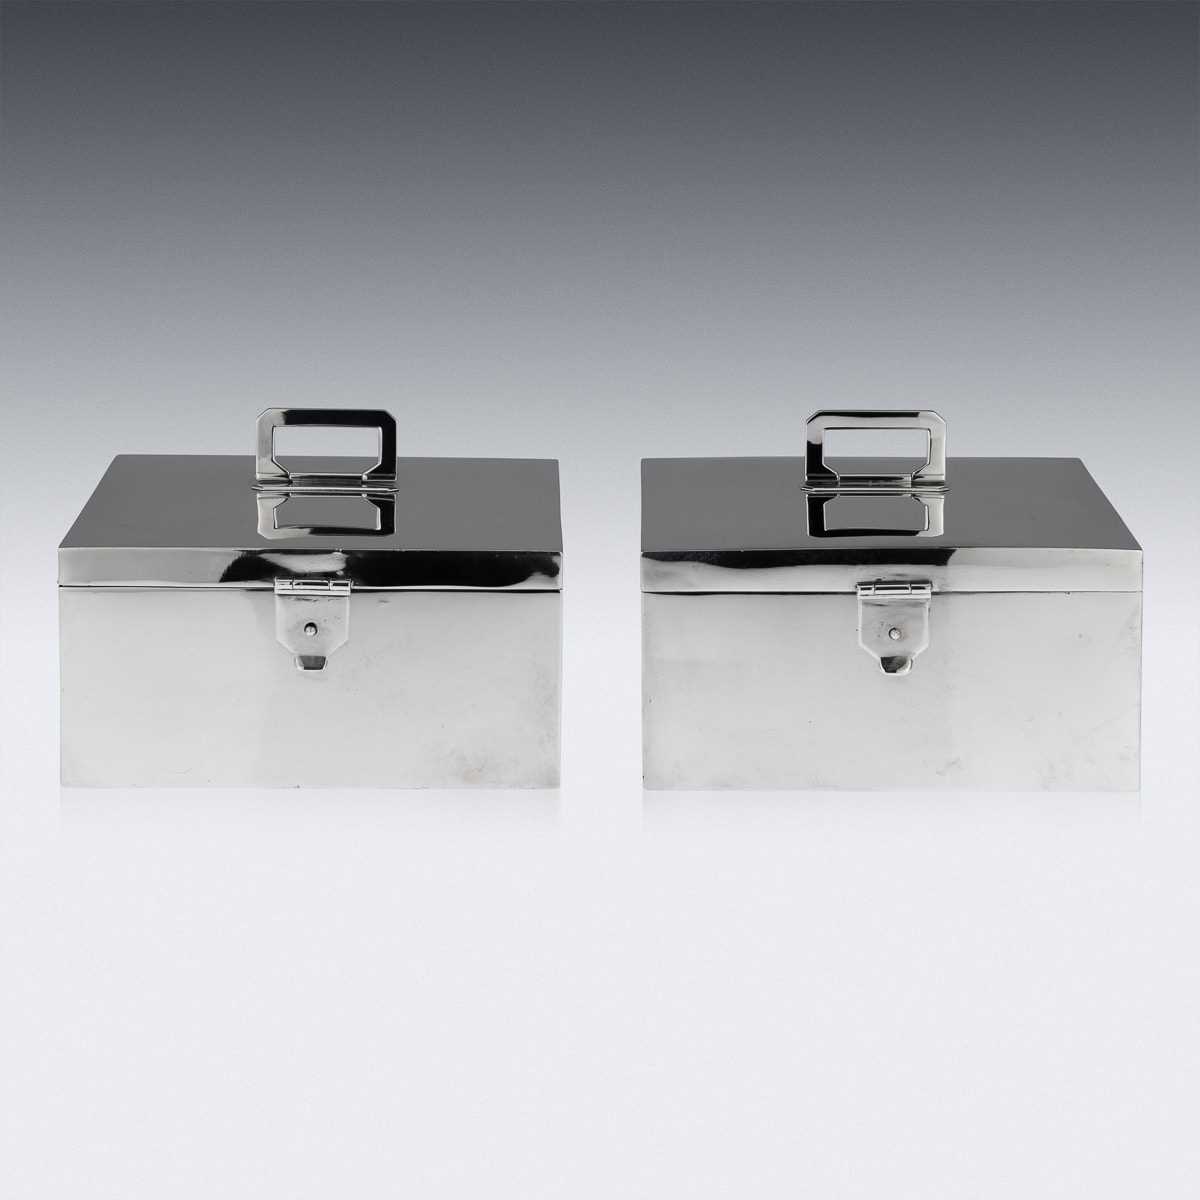 ASPREY & CO. : A PAIR OF STERLING SILVER ART DECO CIGAR BOXES, C. 1936 - Image 12 of 14